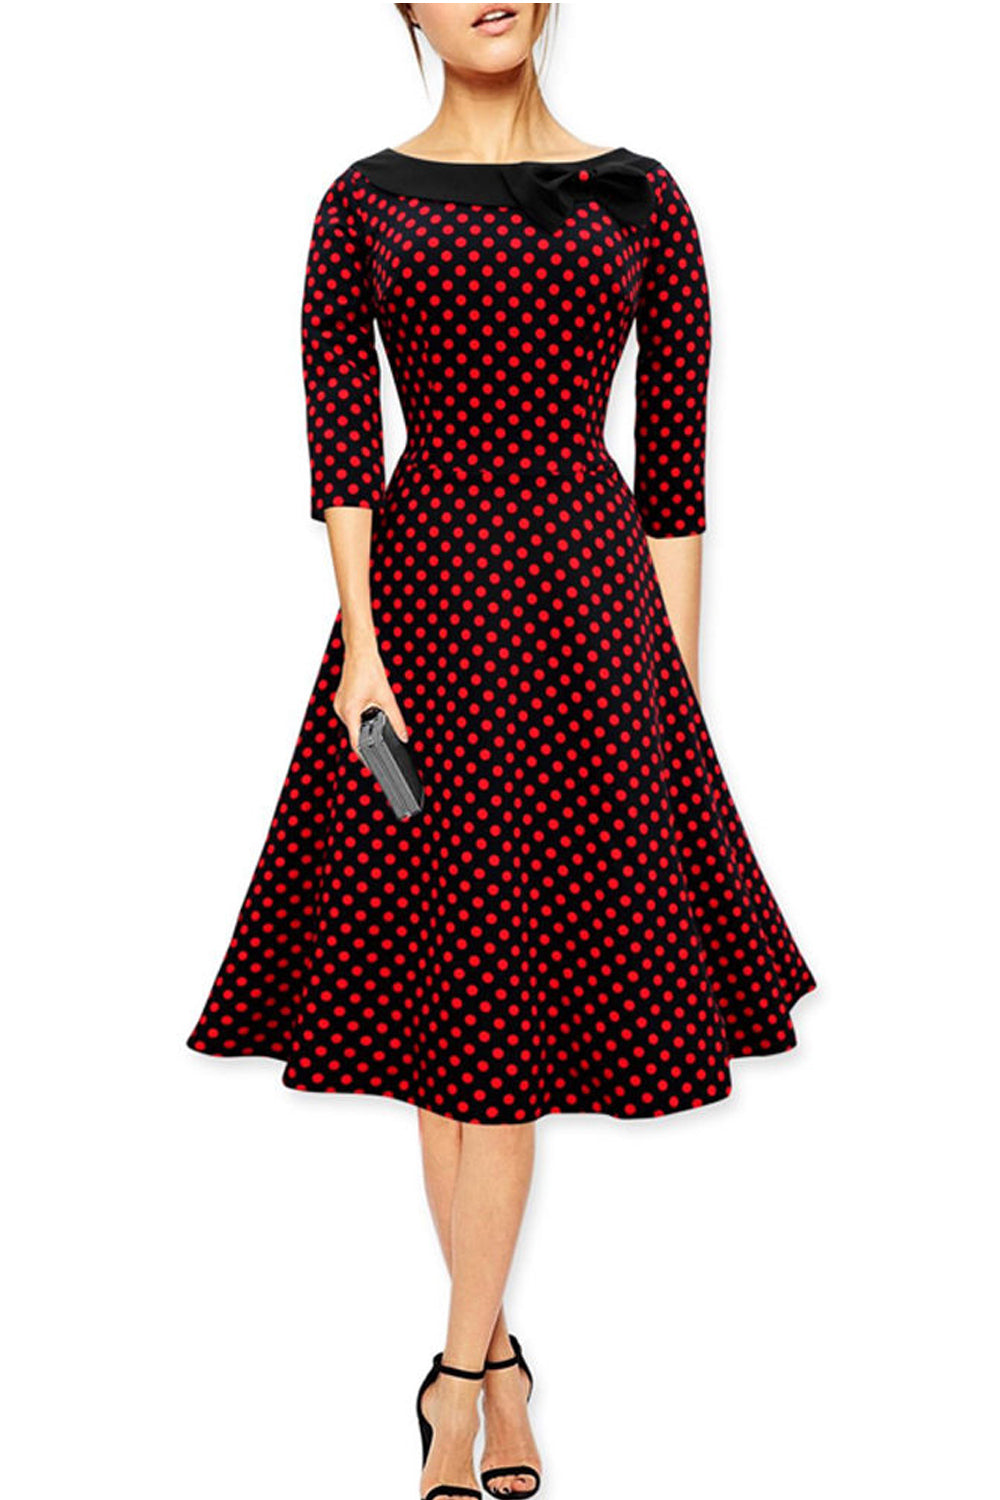 Ketty More Women Round Neck With Bow Full Doted Halter Dress Black With Red Dots-KMWD274